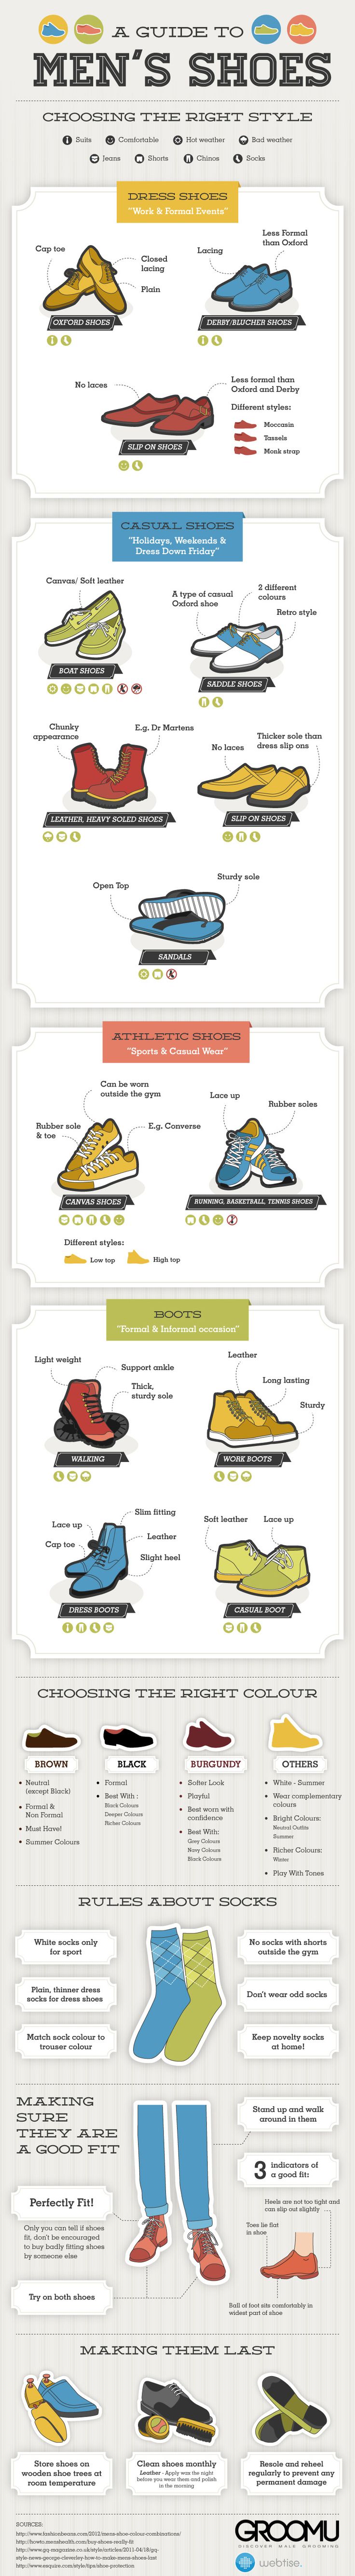 A Guide To Men's Shoes...